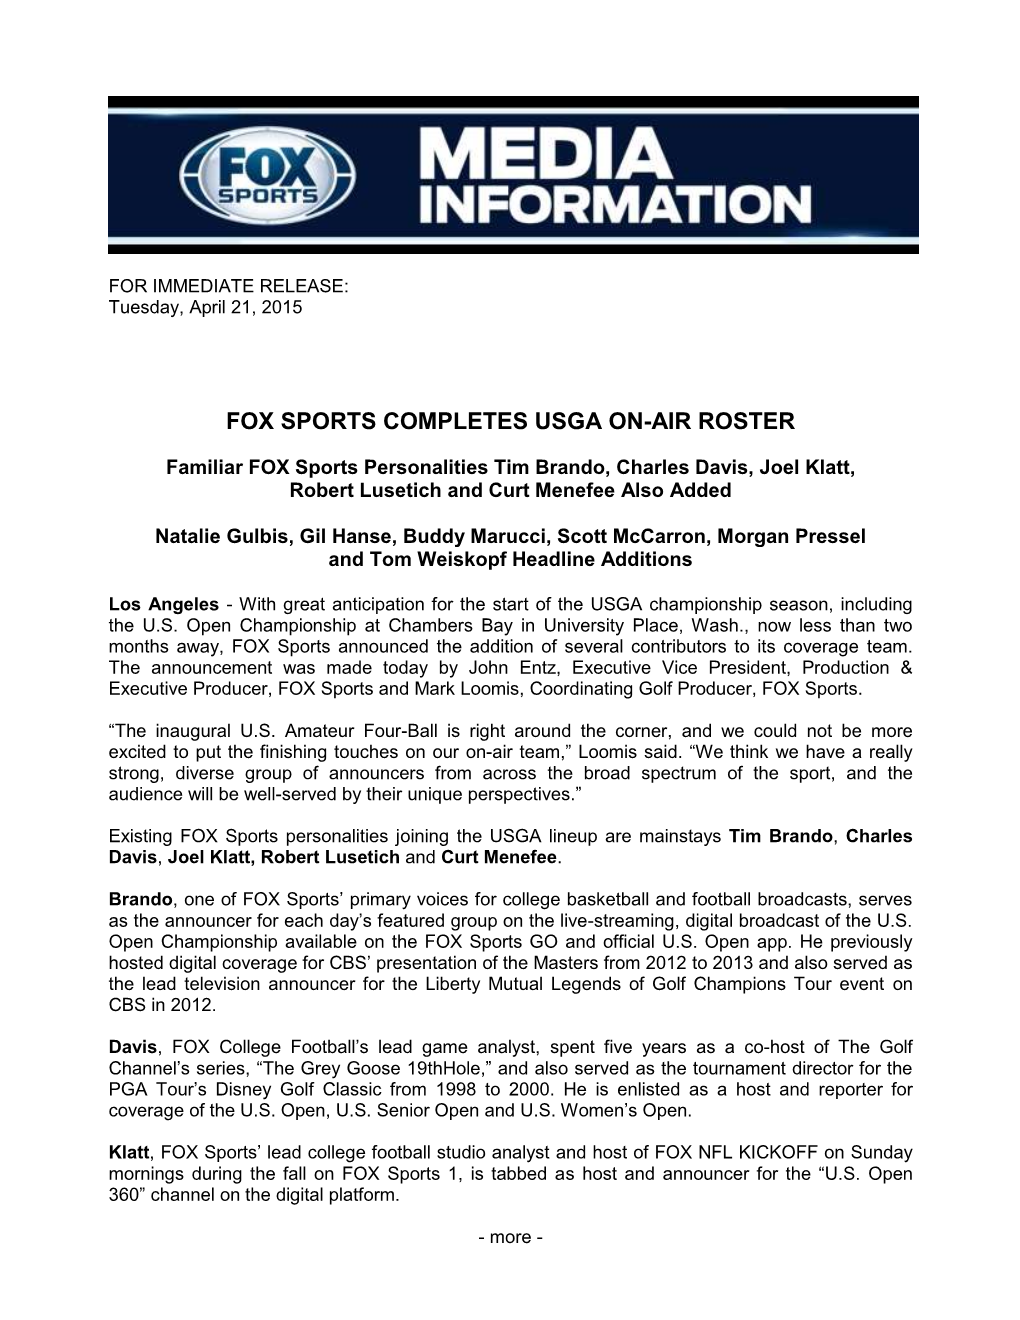 Fox Sports Completes Usga On-Air Roster